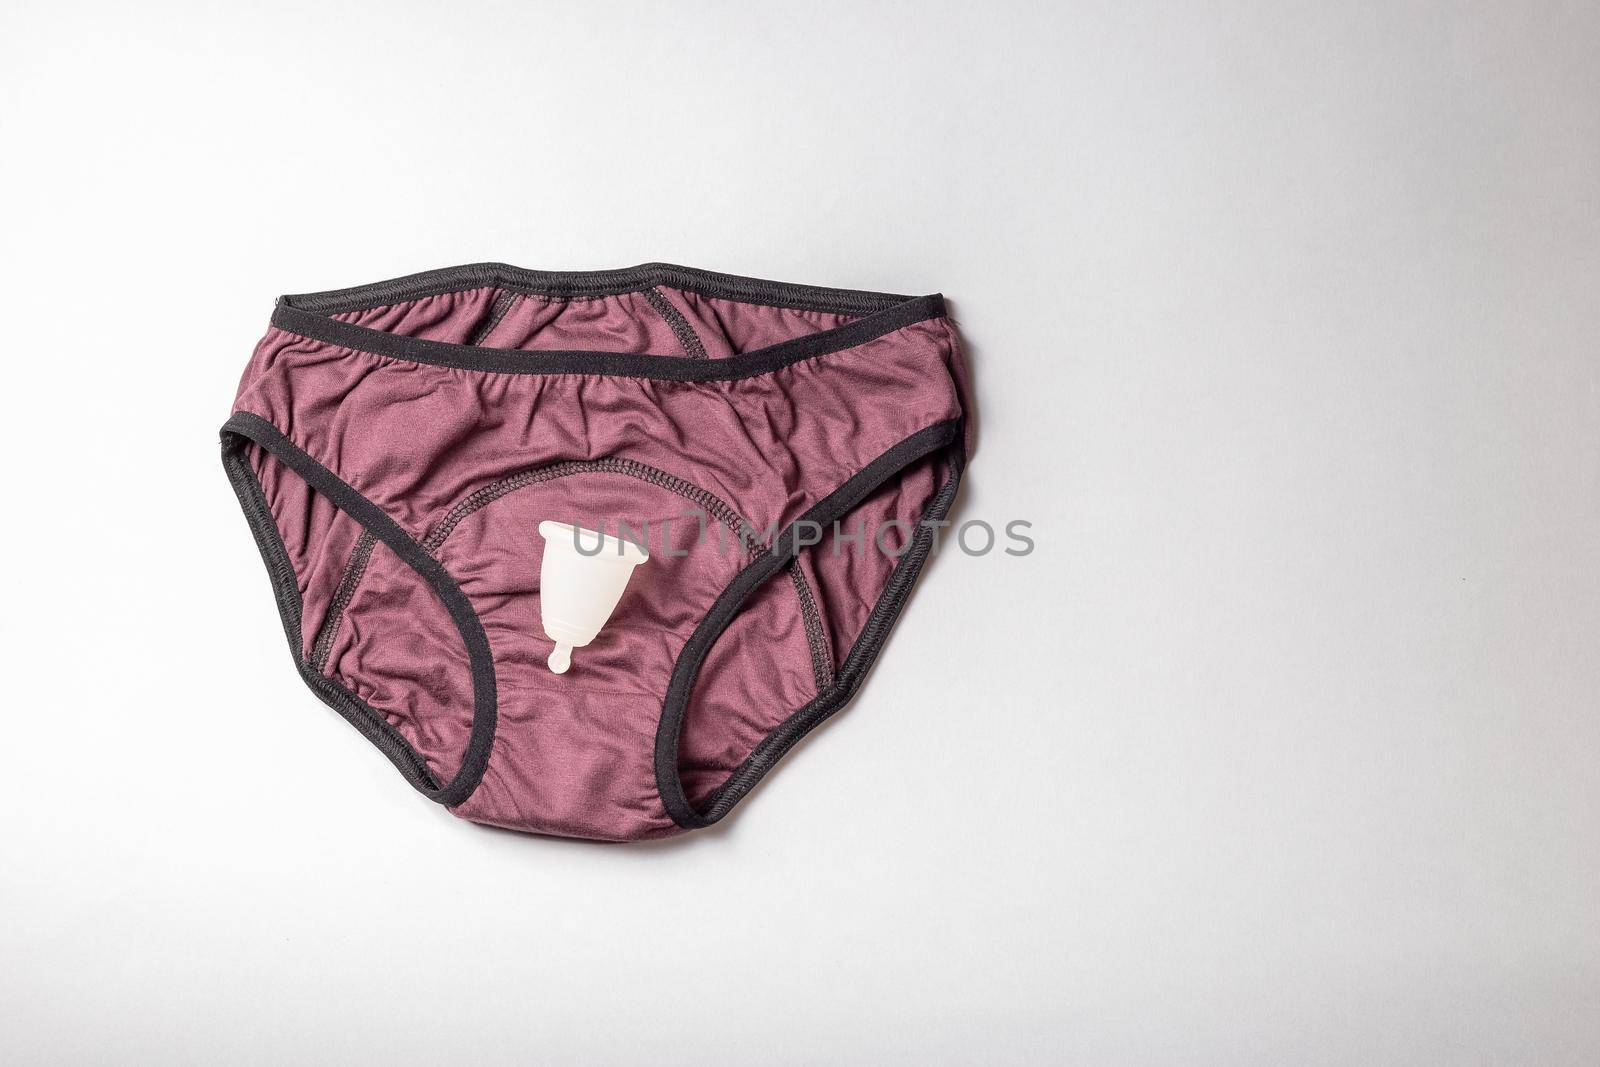 Reusable period products, menstruation underwear panties and menstrual cup. Top view on gray background.